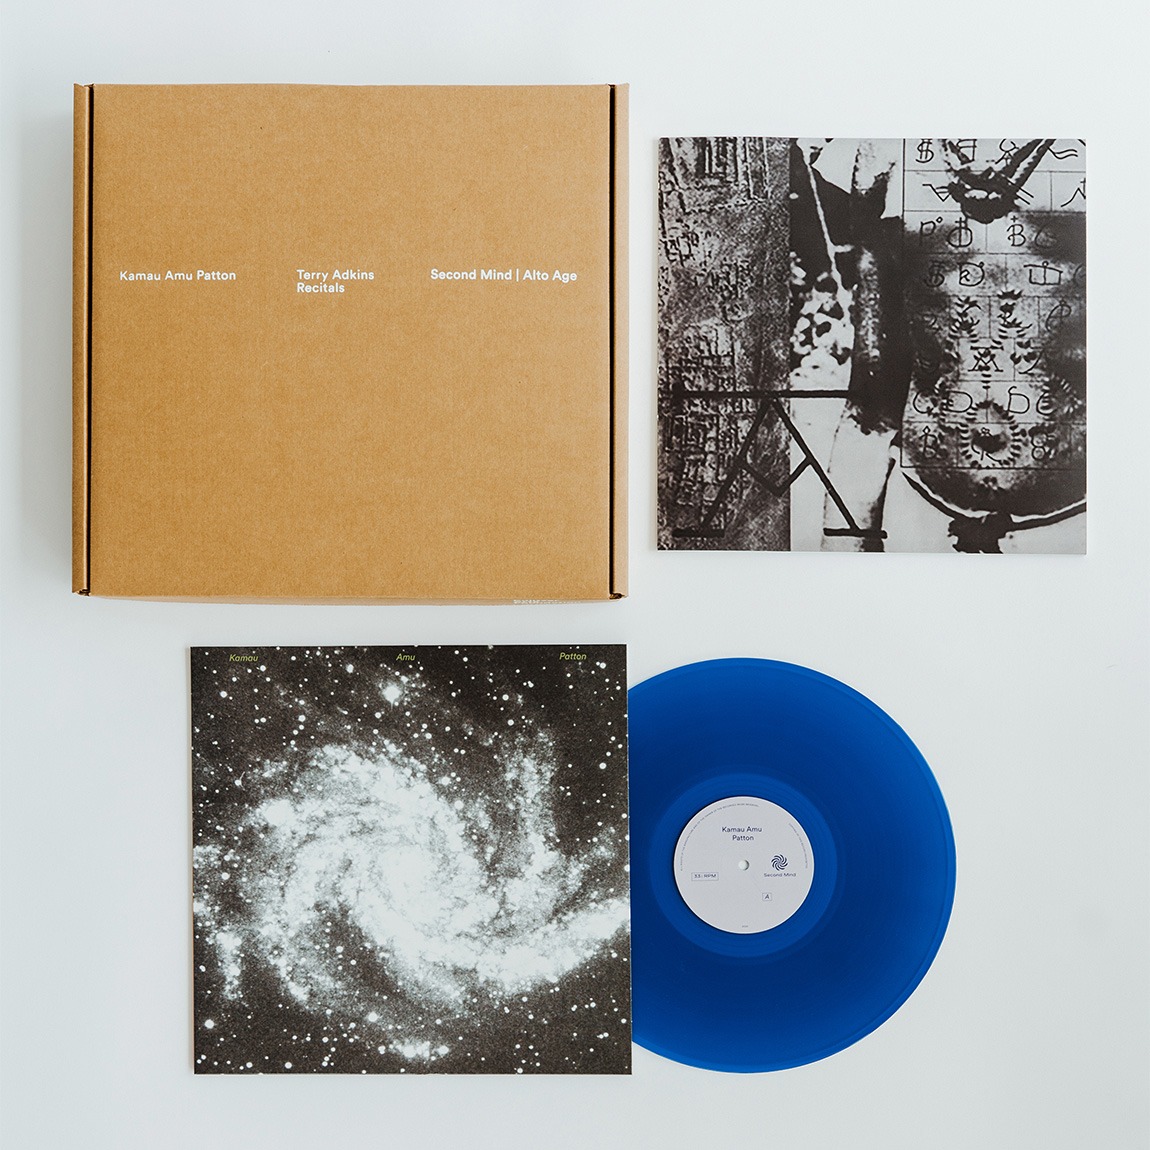 A blue vinyl record, cardboard box, album sleeve, and open publication featuring space imagery